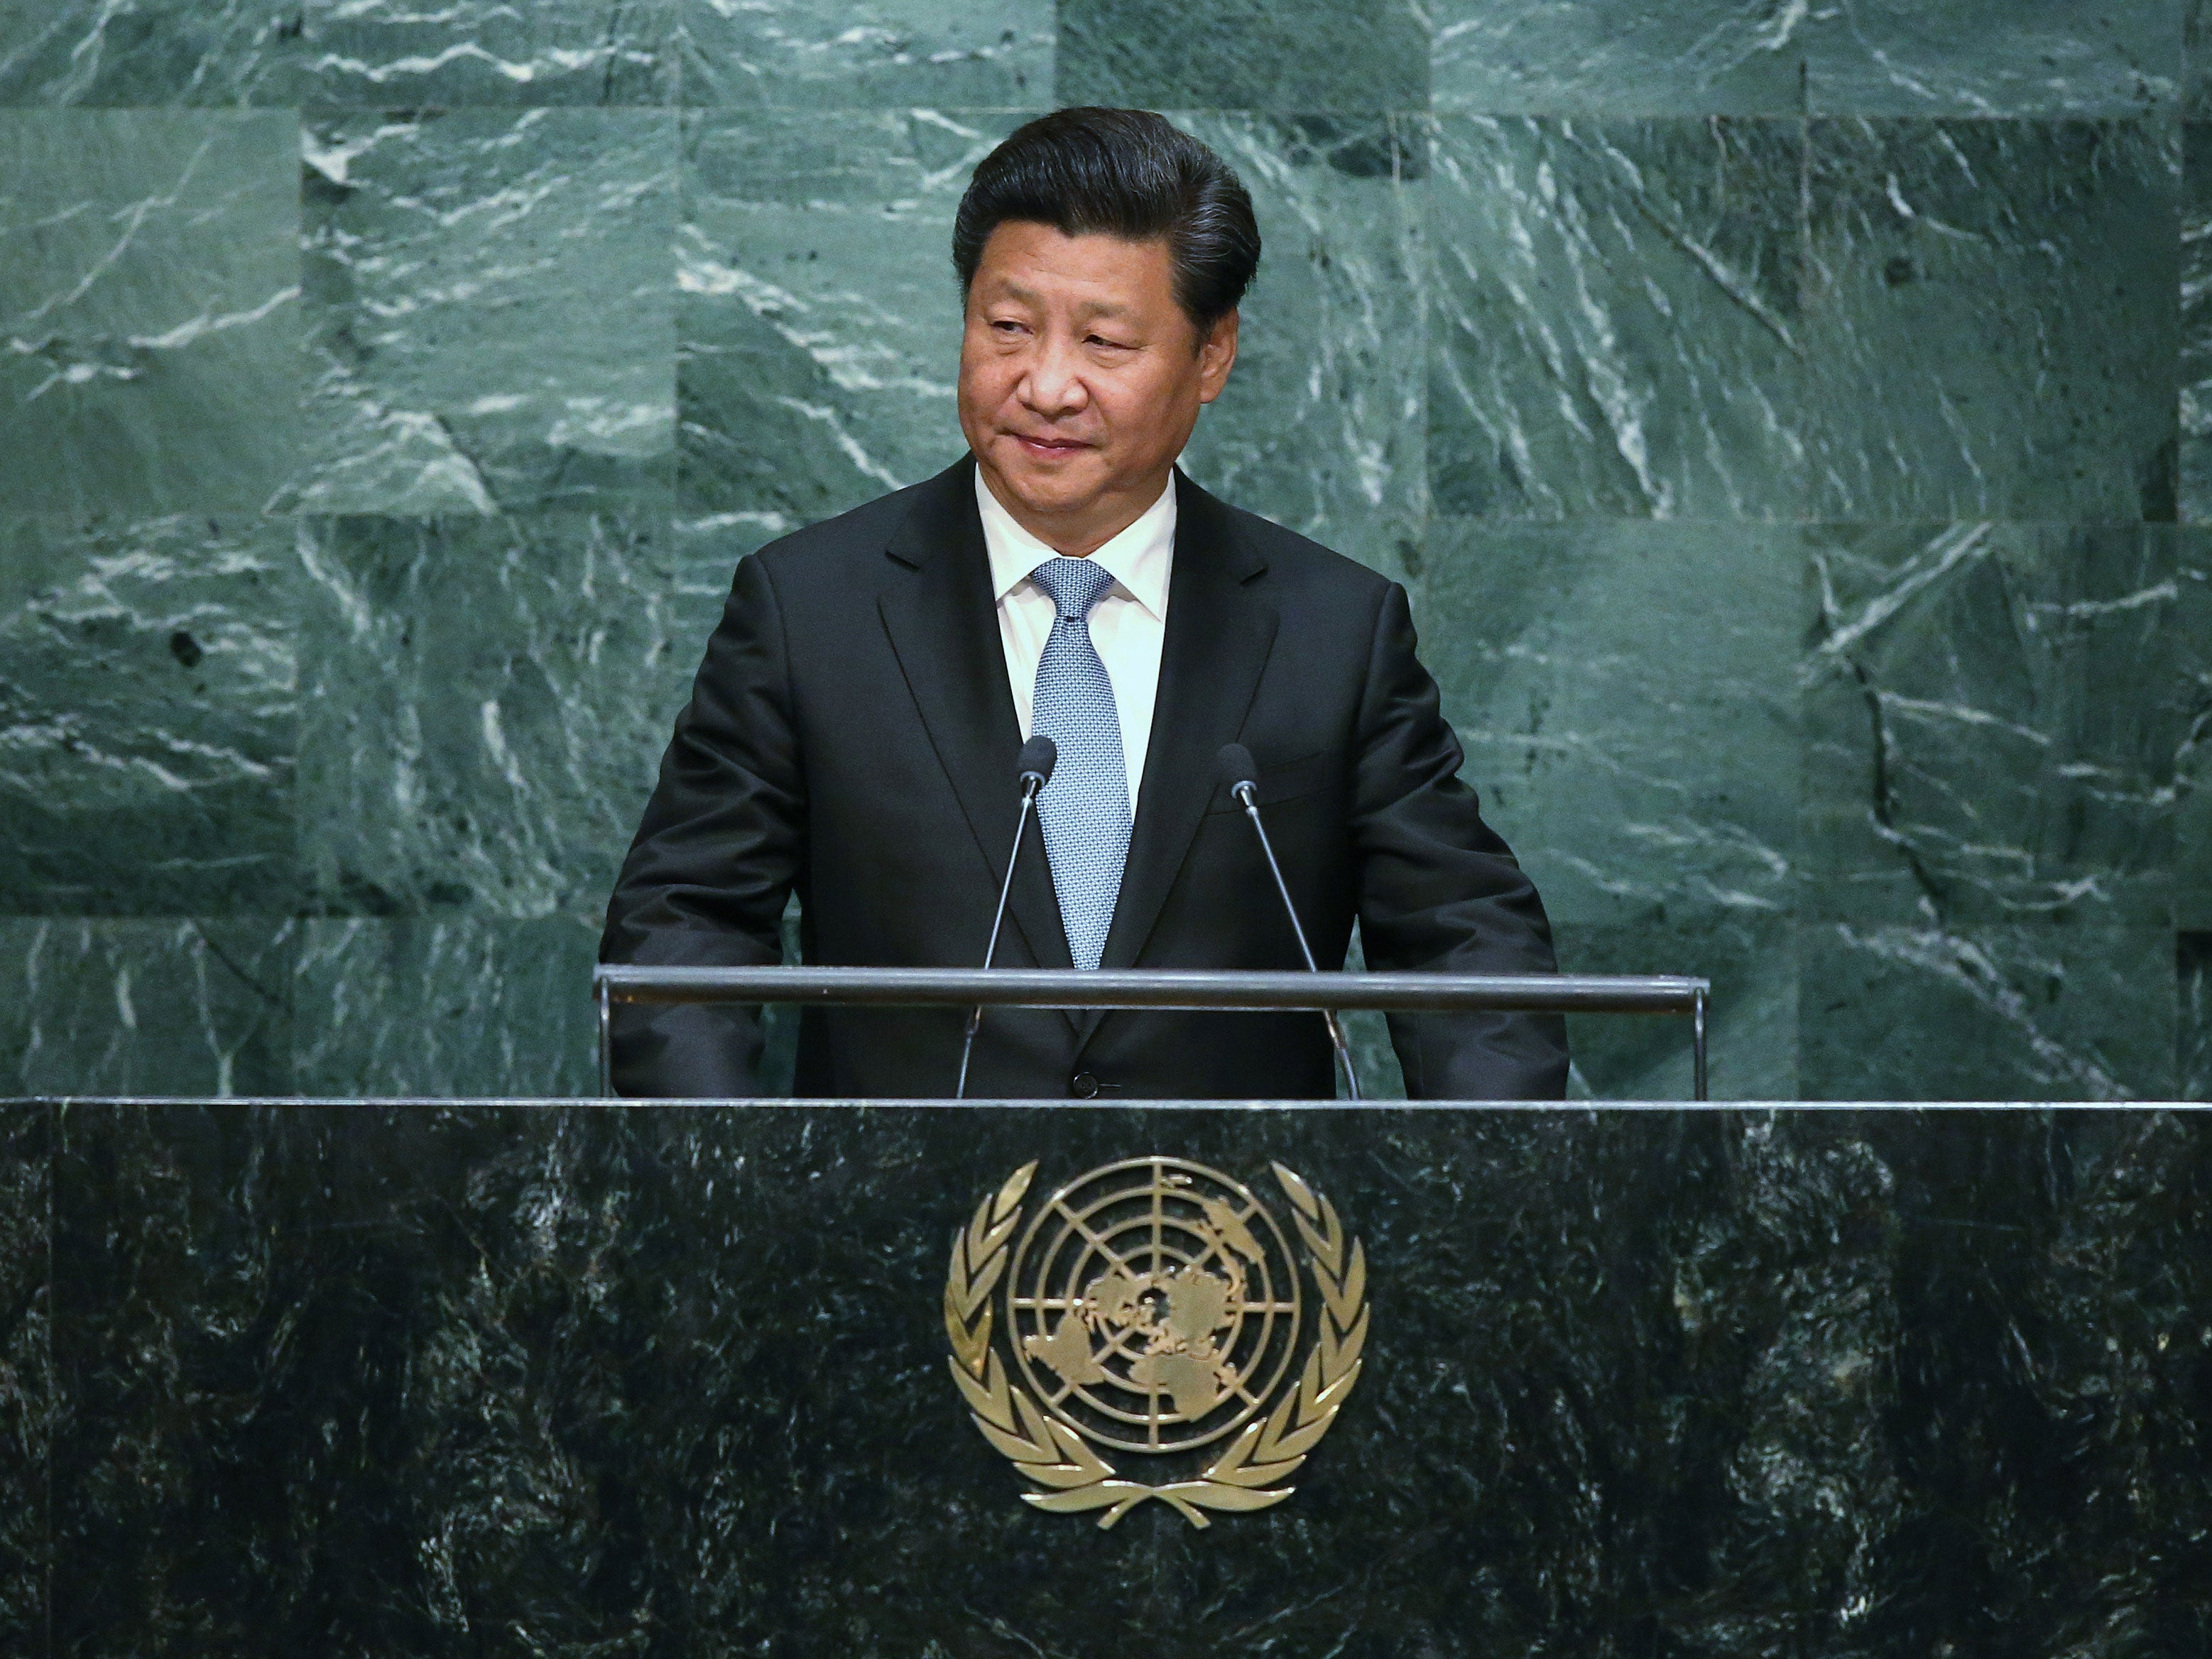 Chinese President Xi Jinping addresses the UN General Assembly on September 28, 2015 in New York City. World leaders gathered for the 70th session of the annual meeting.